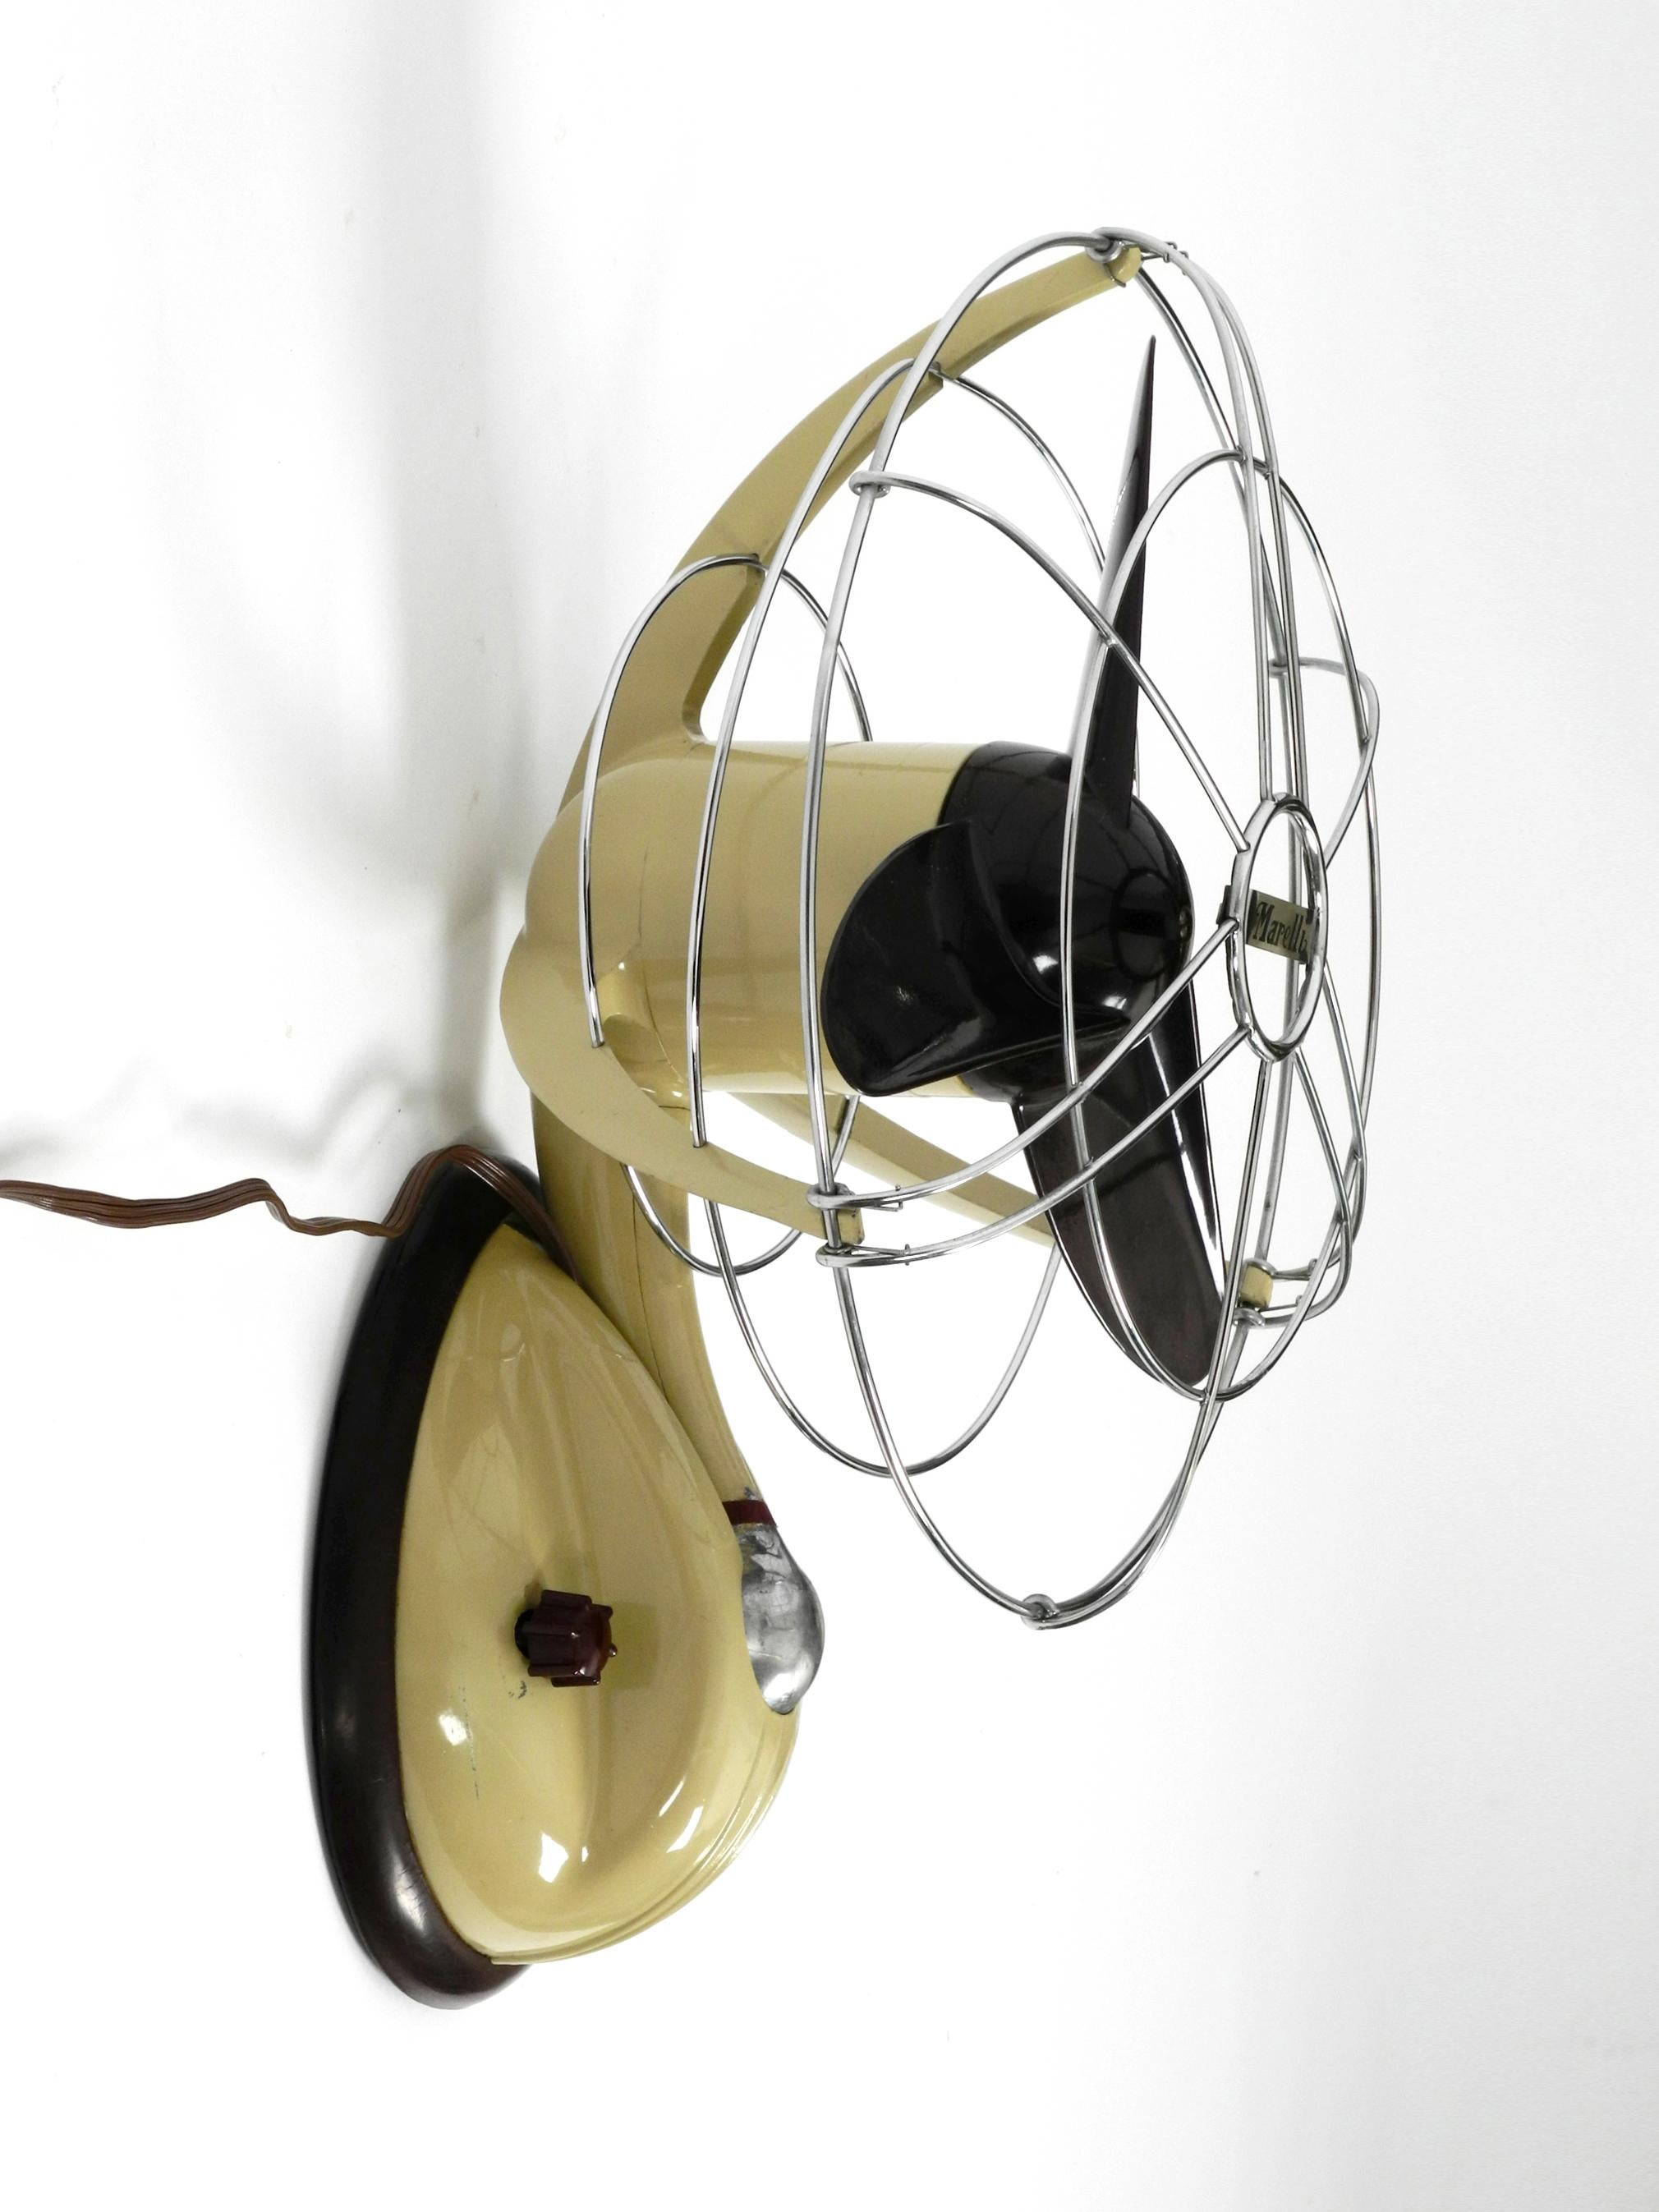 Mid-Century Modern Original 1960s Streamline Table and Wall Fan by Marelli Mod. 304 Made in Italy